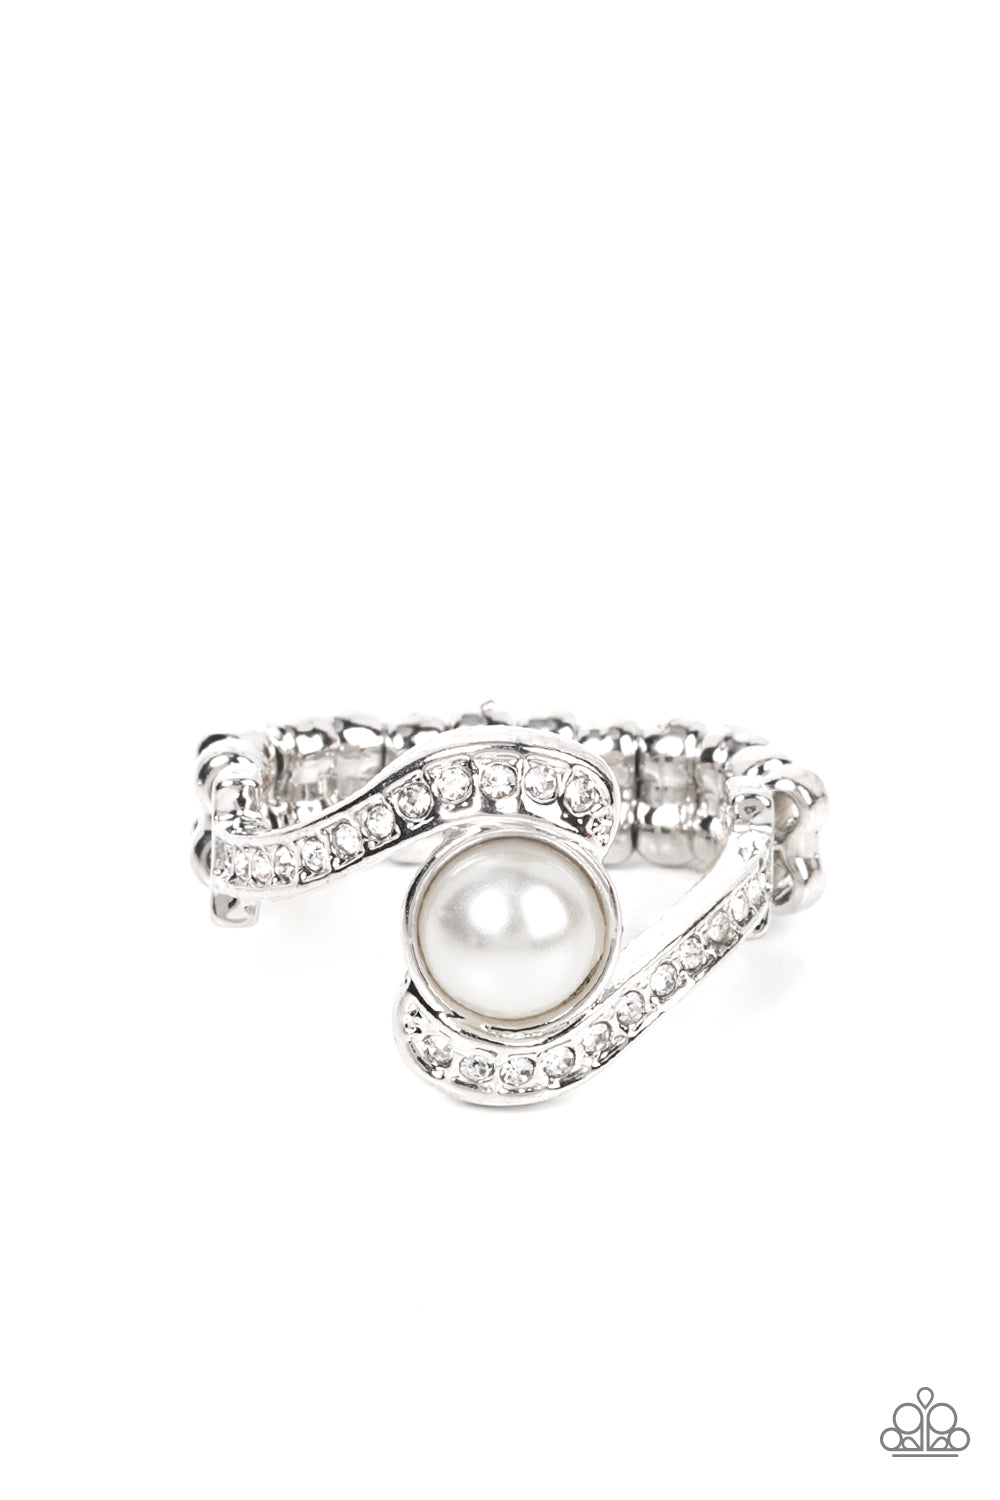 Envious Enrapture White Ring - Paparazzi Accessories   A bubbly white pearl seemingly balances between two swooping silver ribbons dotted in dainty white rhinestones, resulting in a timeless centerpiece atop the finger. Features a dainty stretchy band for a flexible fit.  Sold as one individual ring.